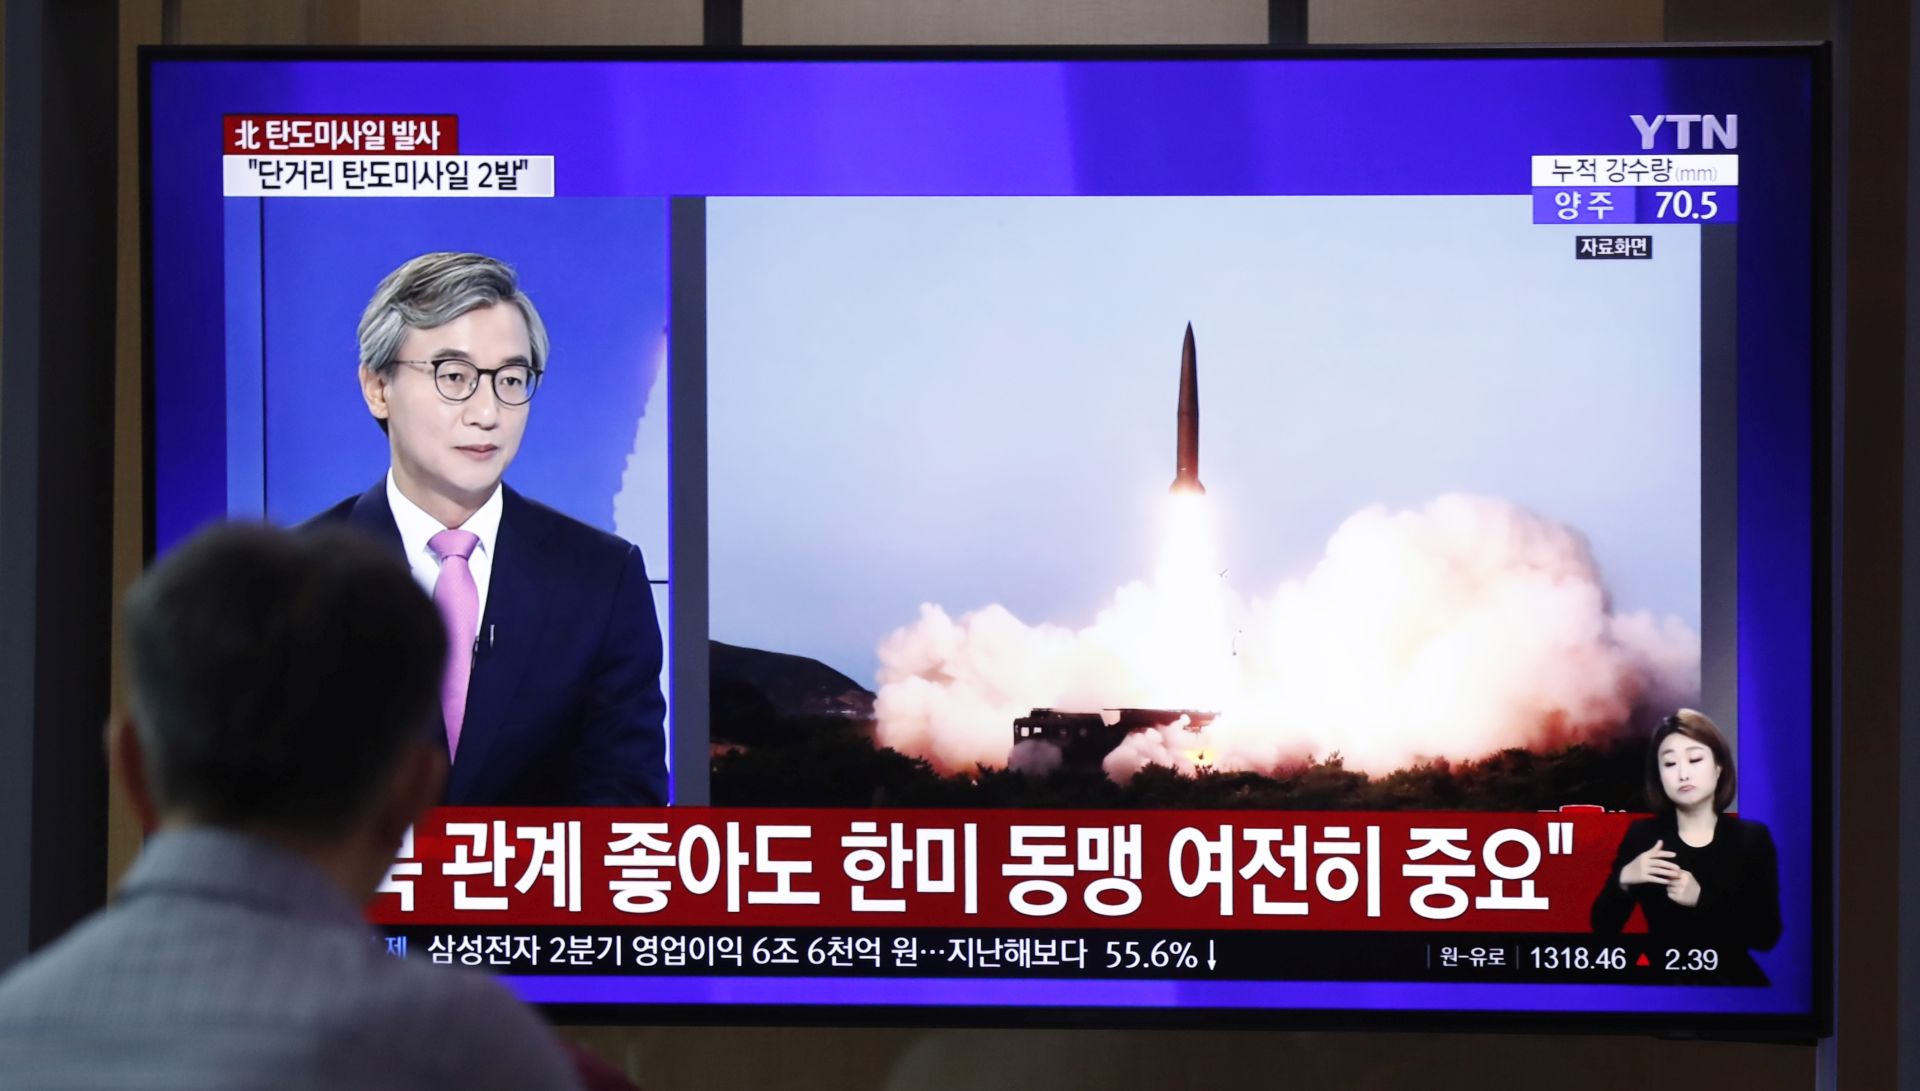 epa07749486 A South Korean man watches a breaking news report for North Korea's missile launch, at Seoul Station in Seoul, South Korea, 31 July 2019. According to South Korea's Joint Chiefs of Staff (JCS), North Korea fired two short-range missiles toward the East Sea from the Kalma area near the North's eastern port of Wonsan on 31 July.  EPA/JEON HEON-KYUN